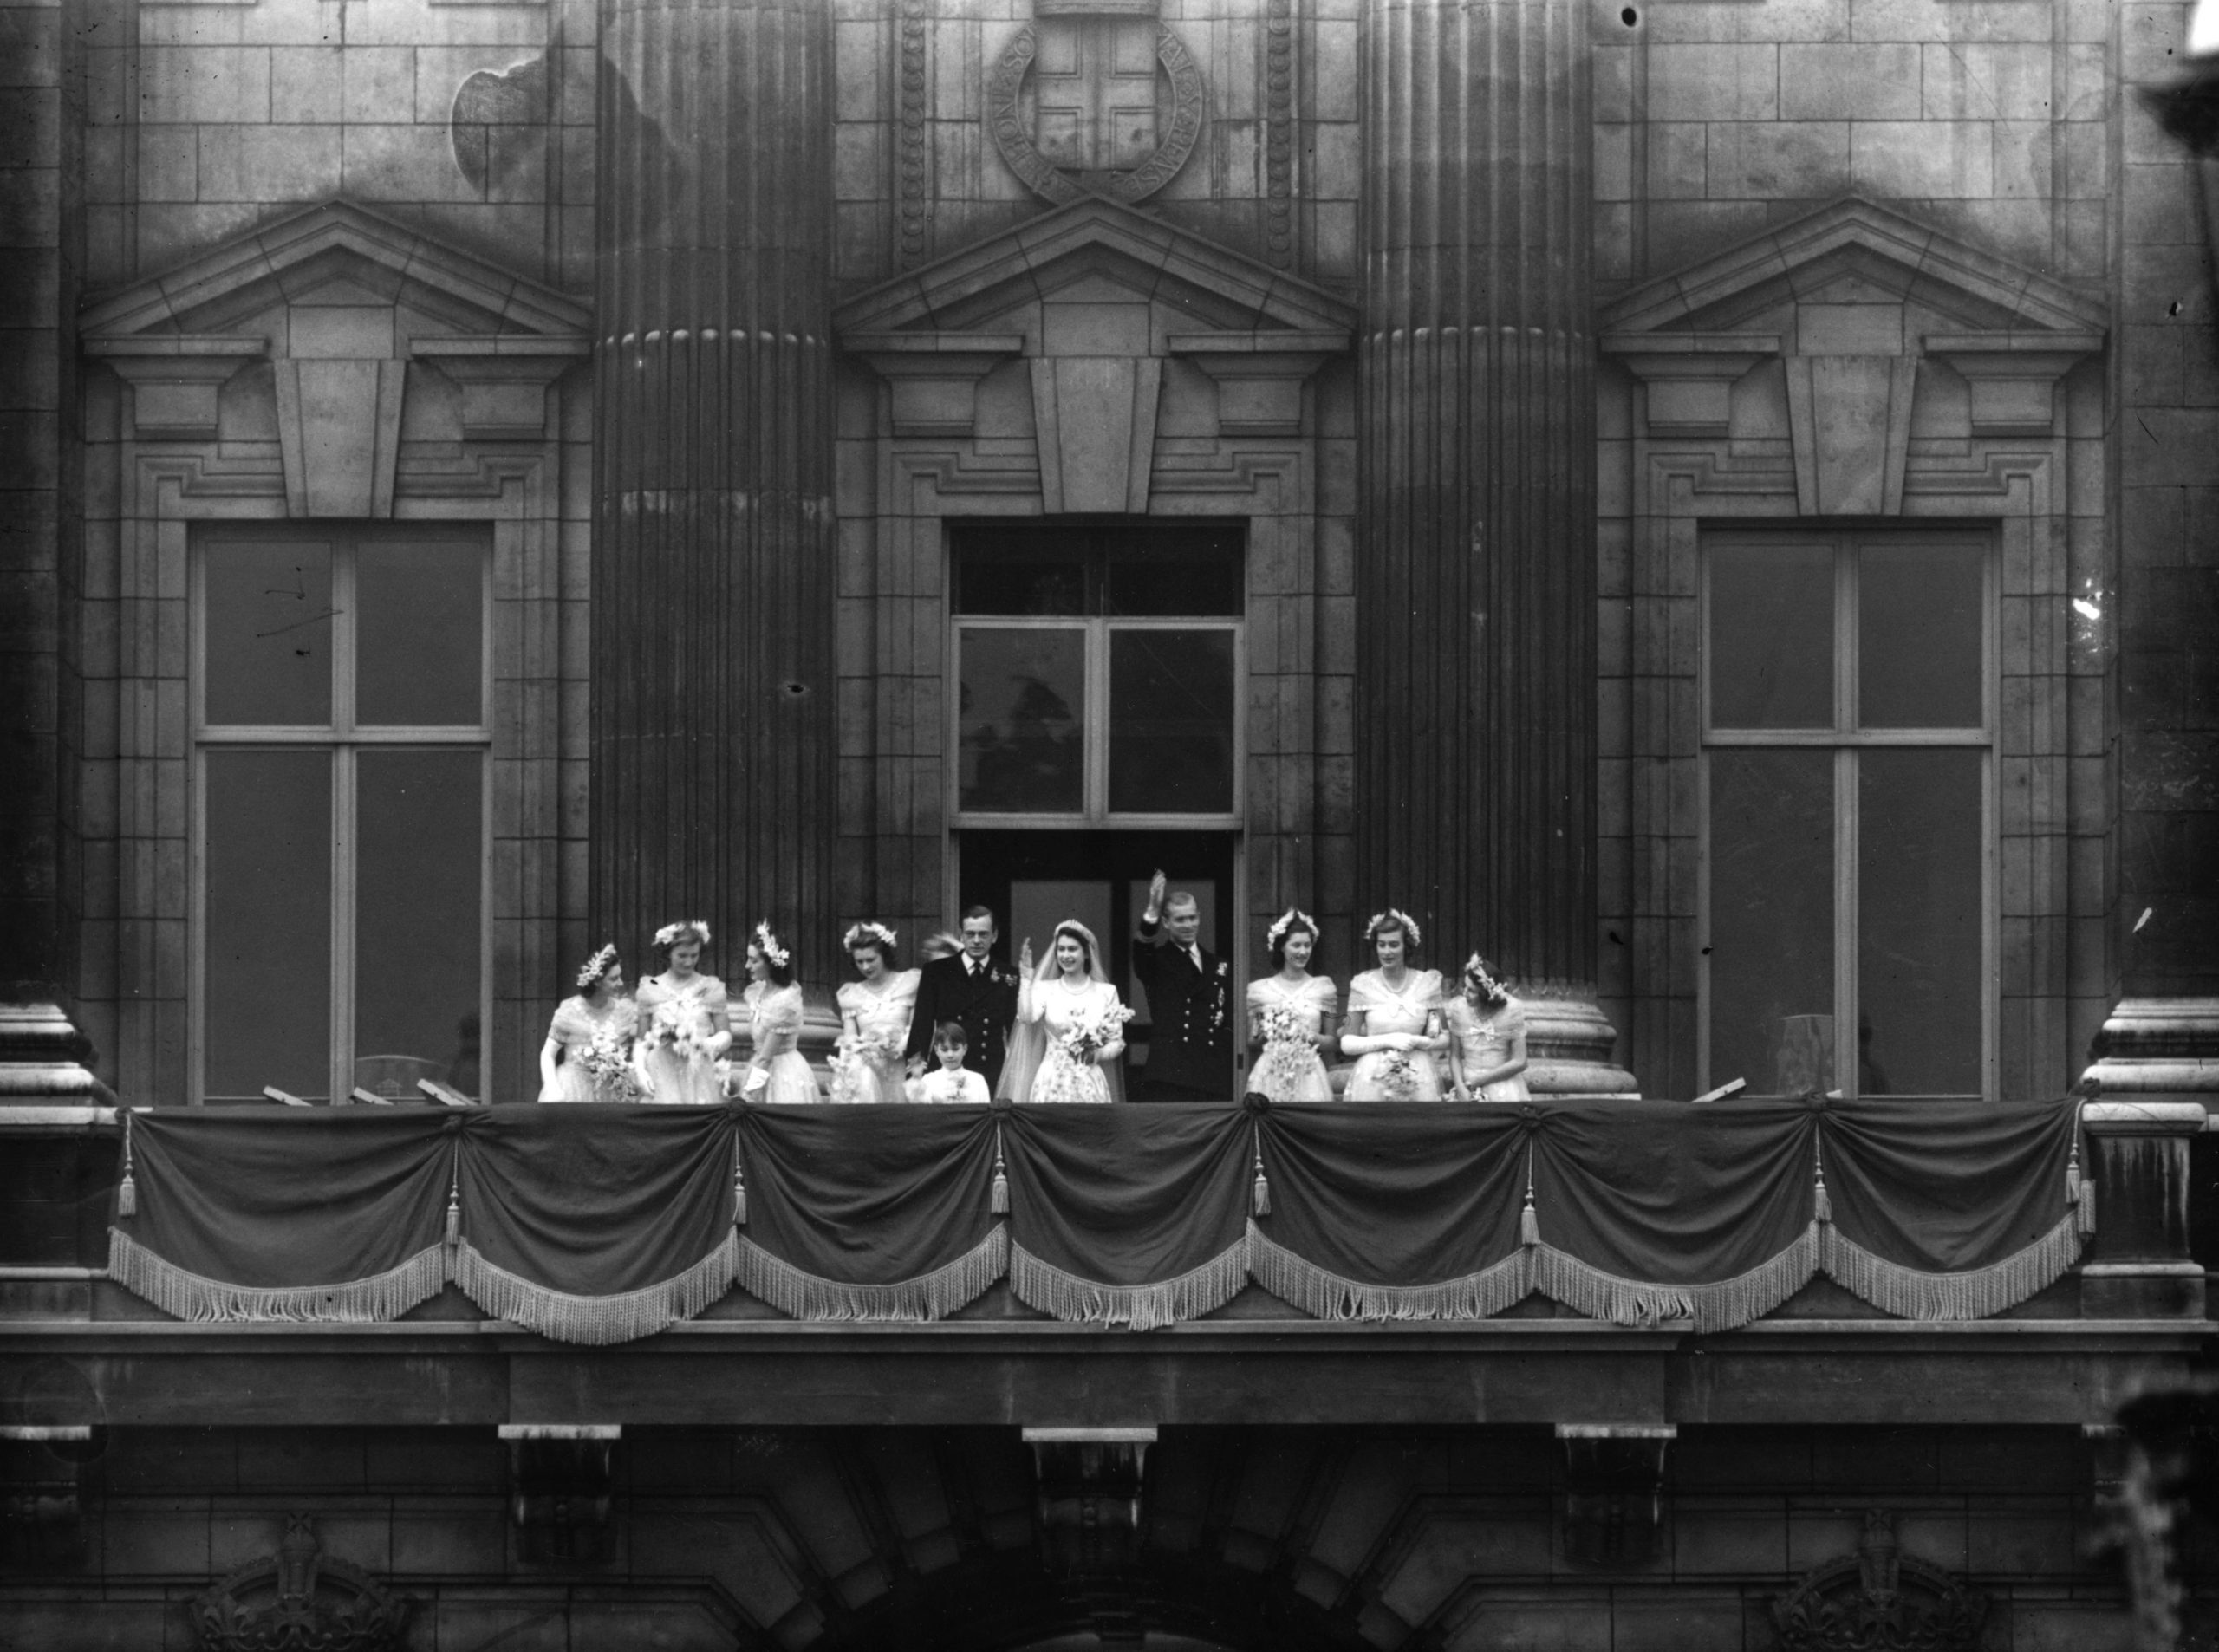 Balcony Wave on the wedding of Queen Elizabeth and Prince Philip